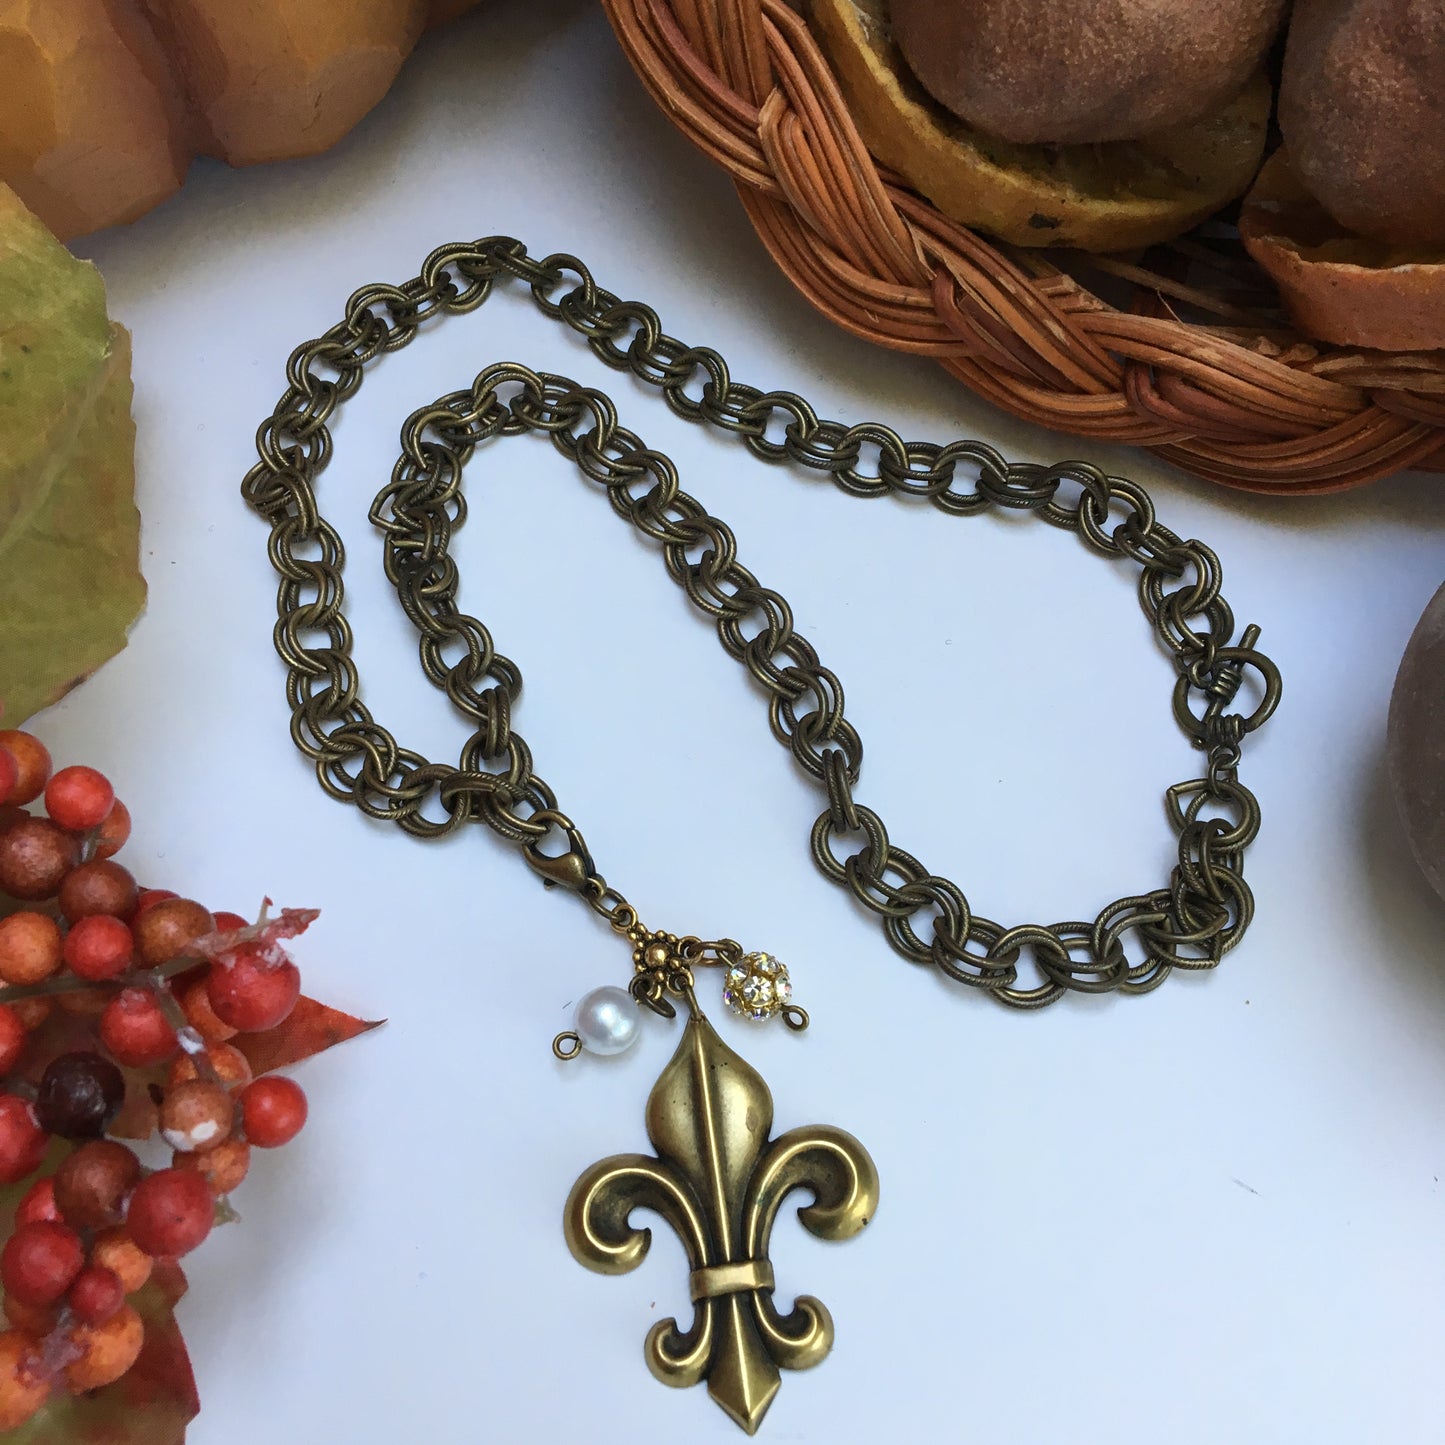 Our double link antique brass chain holds a stunning  antique gold fleur de lis embellished with crystal beads.   The necklace is 18" long and the closure is a toggle clasp.   This comes in a suede pouch for easy gift giving.  Sure to please fleur de lis lovers!